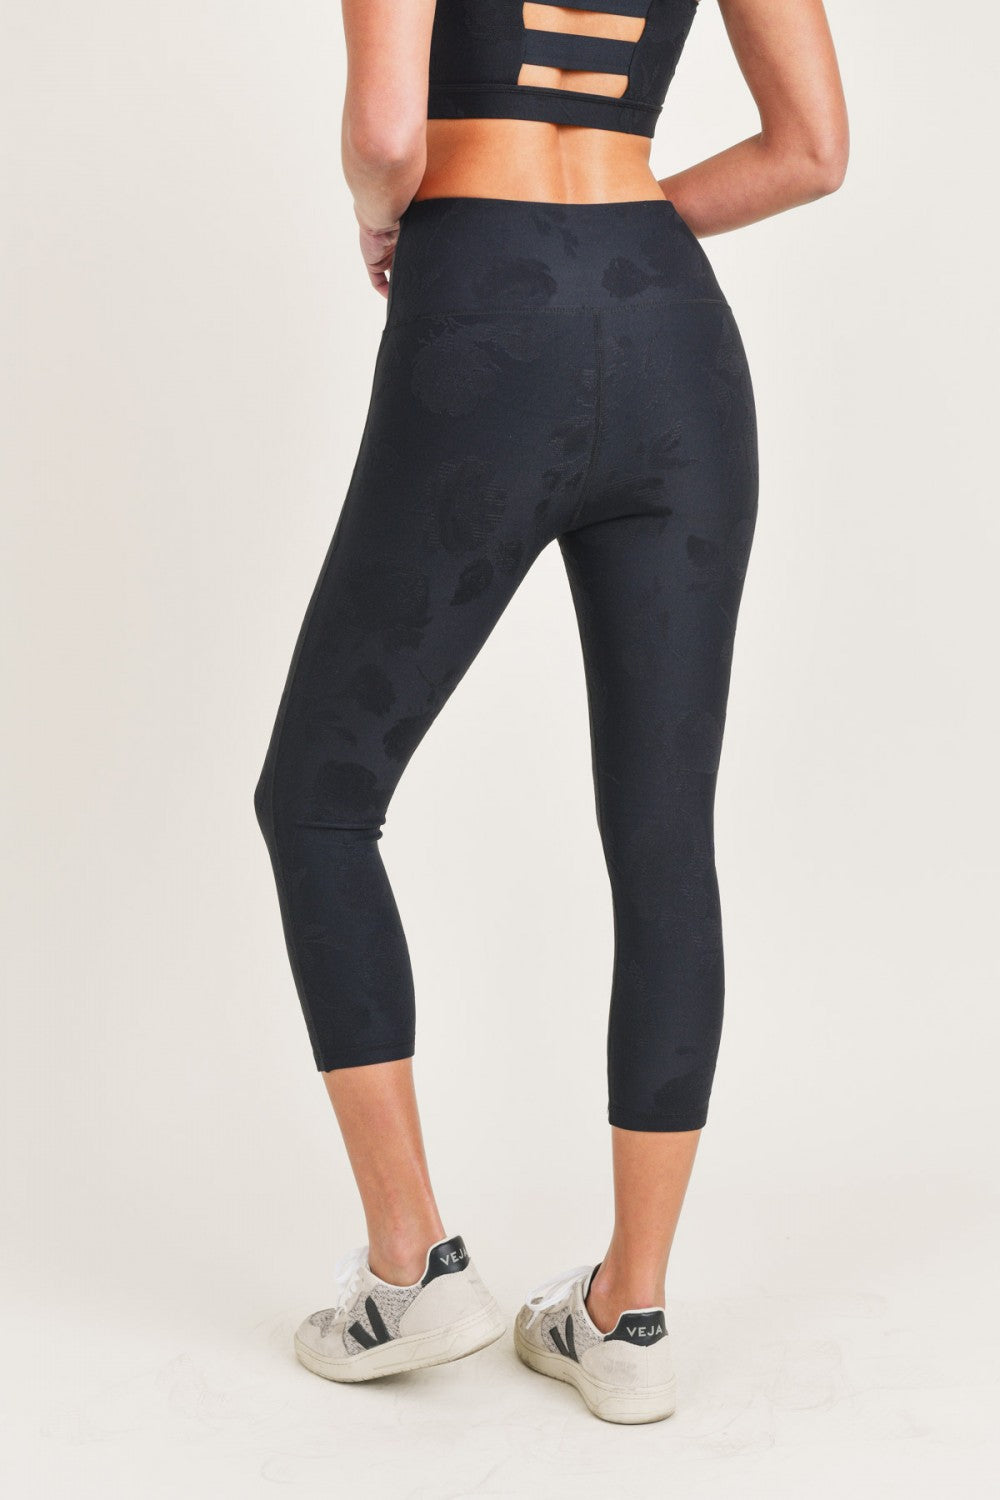 Textured Jacquard High Waist Leggings – The Obsessions Boutique